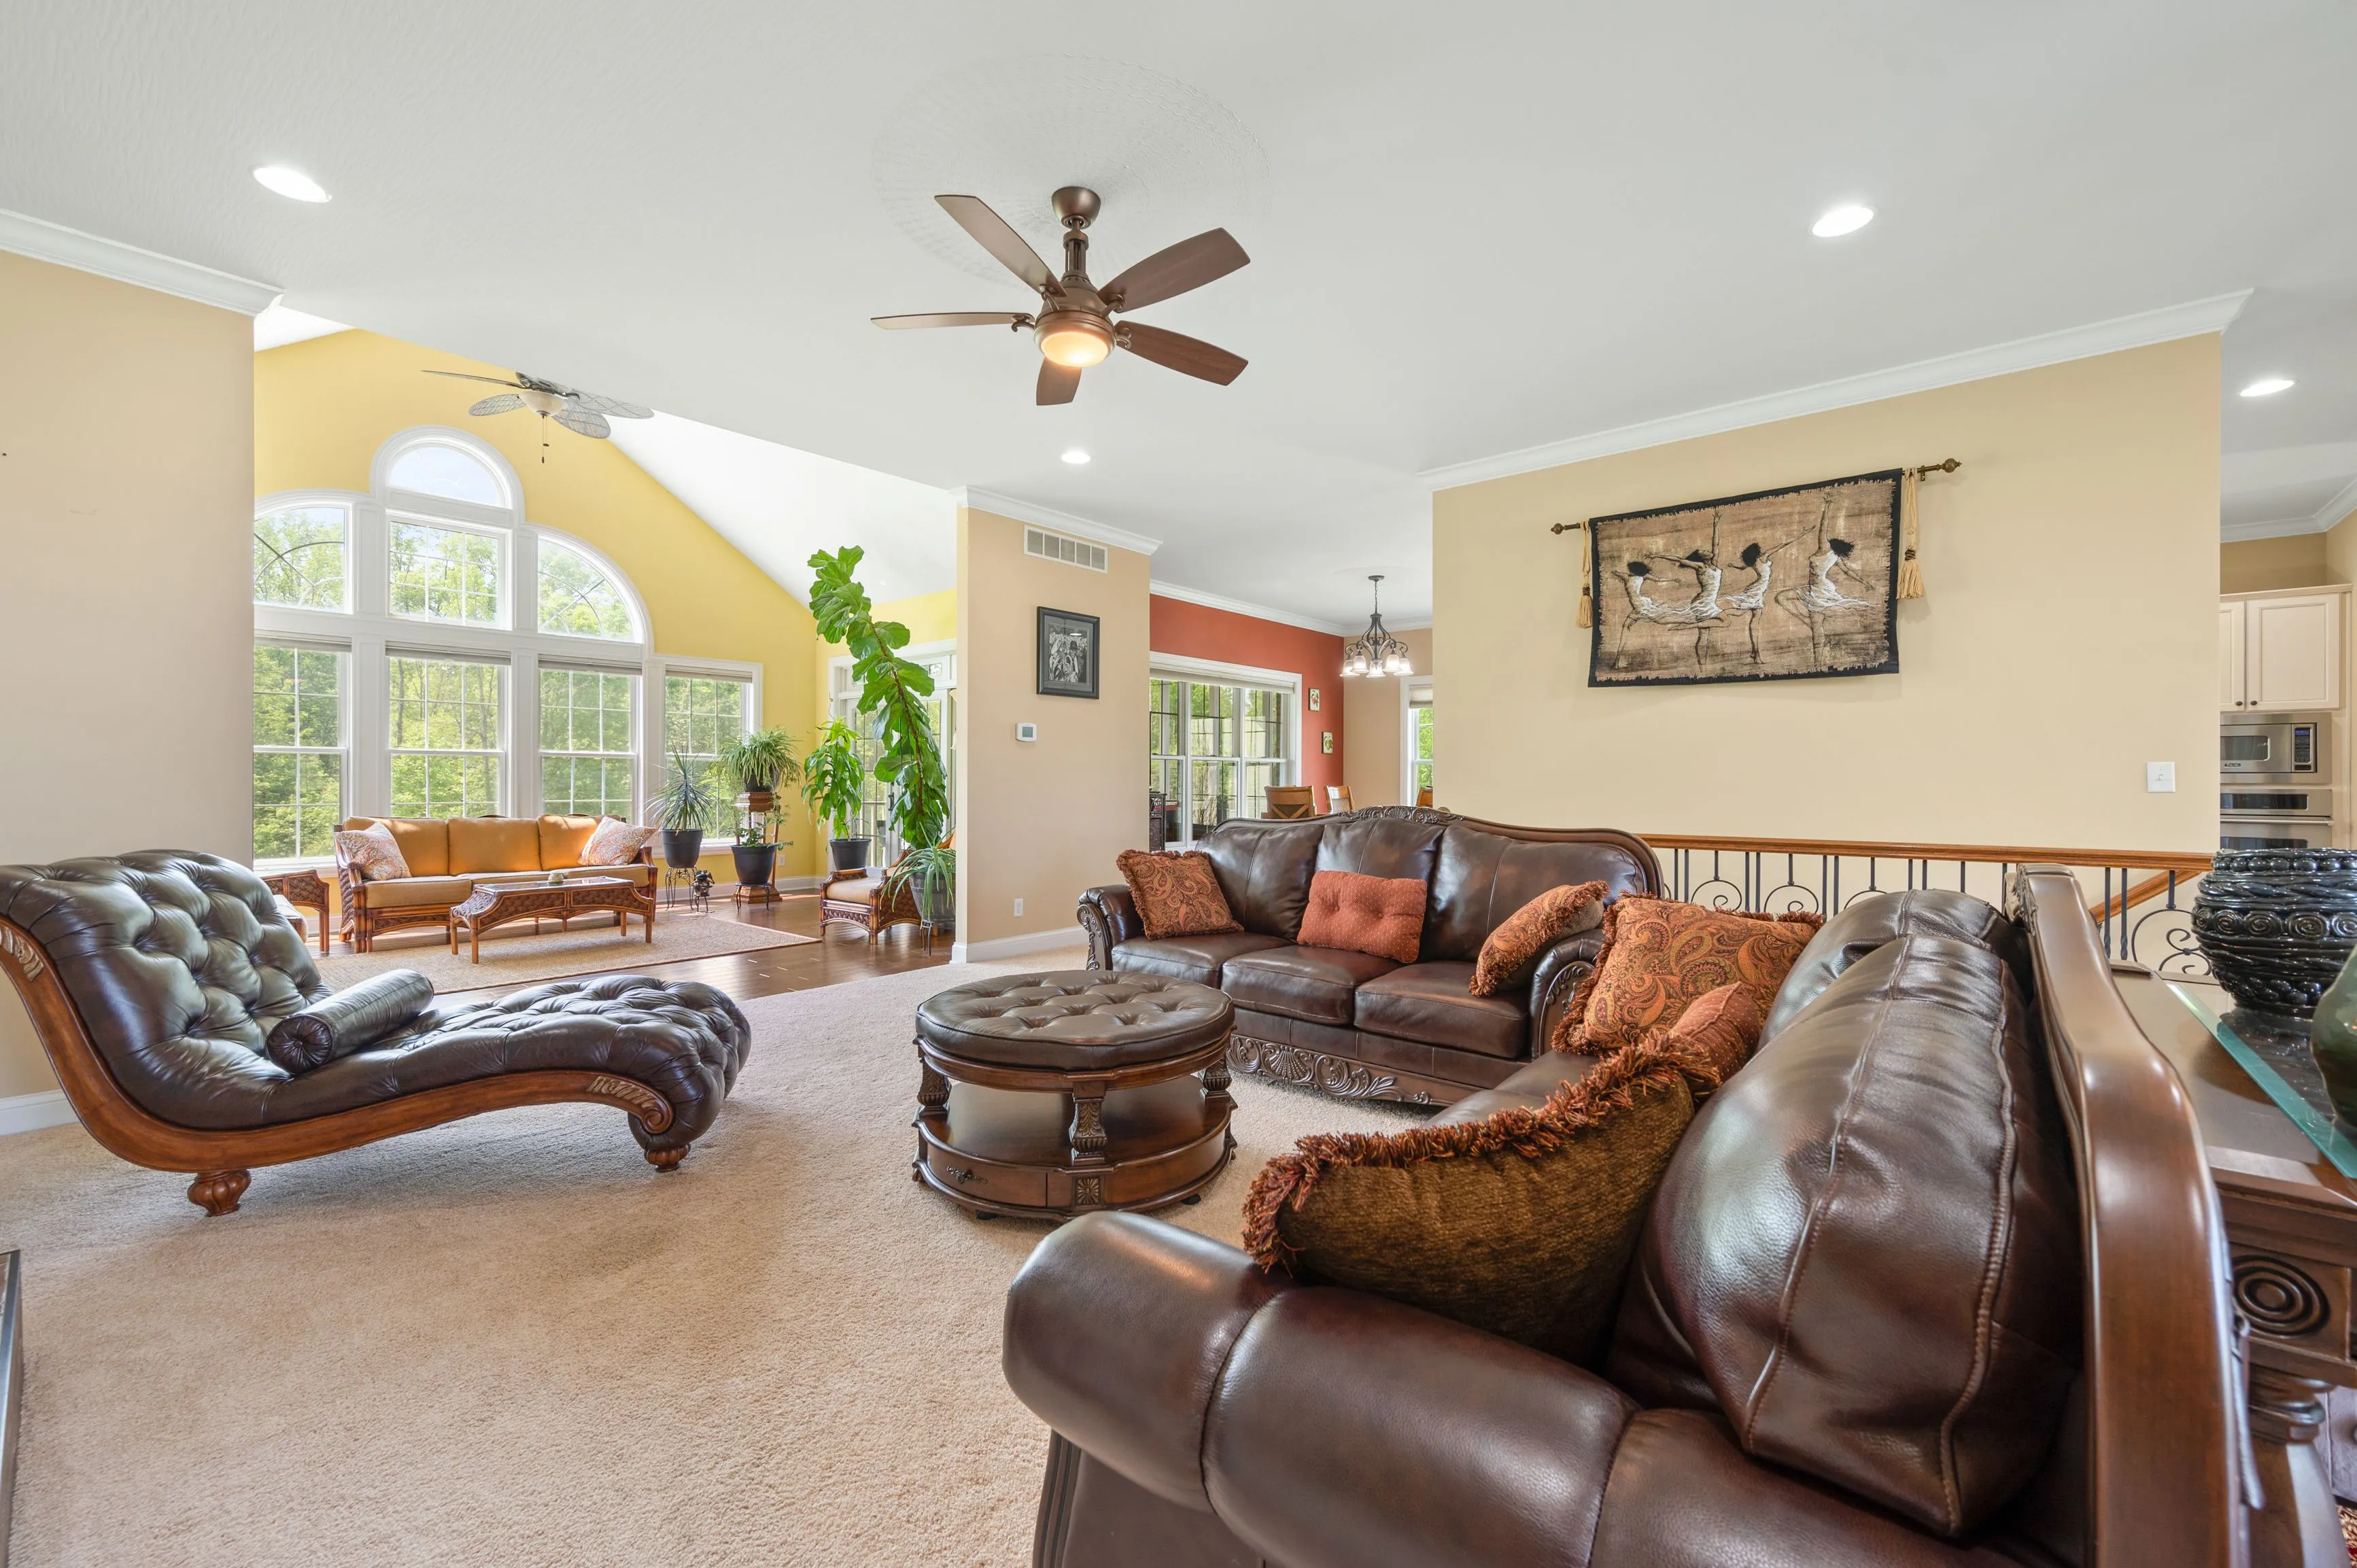 Spacious living room with high ceilings, large arched windows, tan walls, and leather furniture.